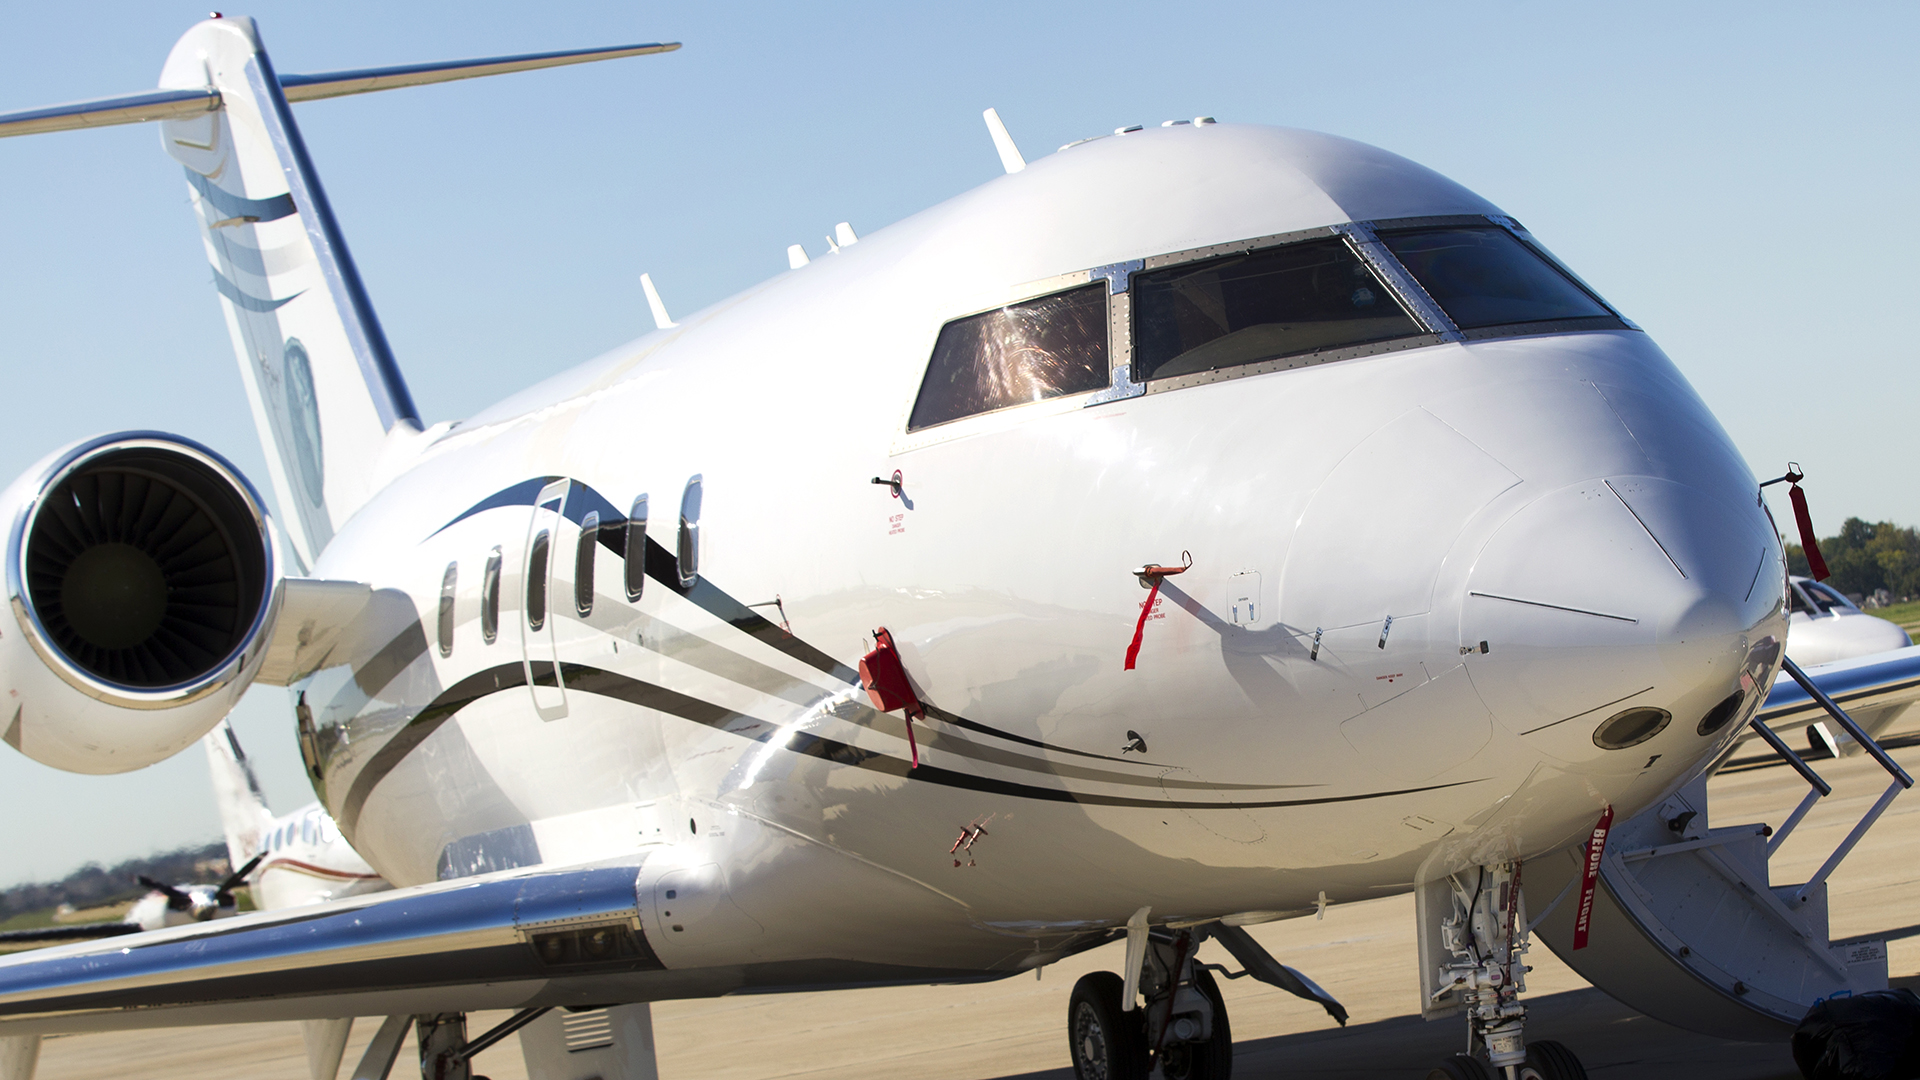 Private jet registration can be hidden by FAA based on new bill.